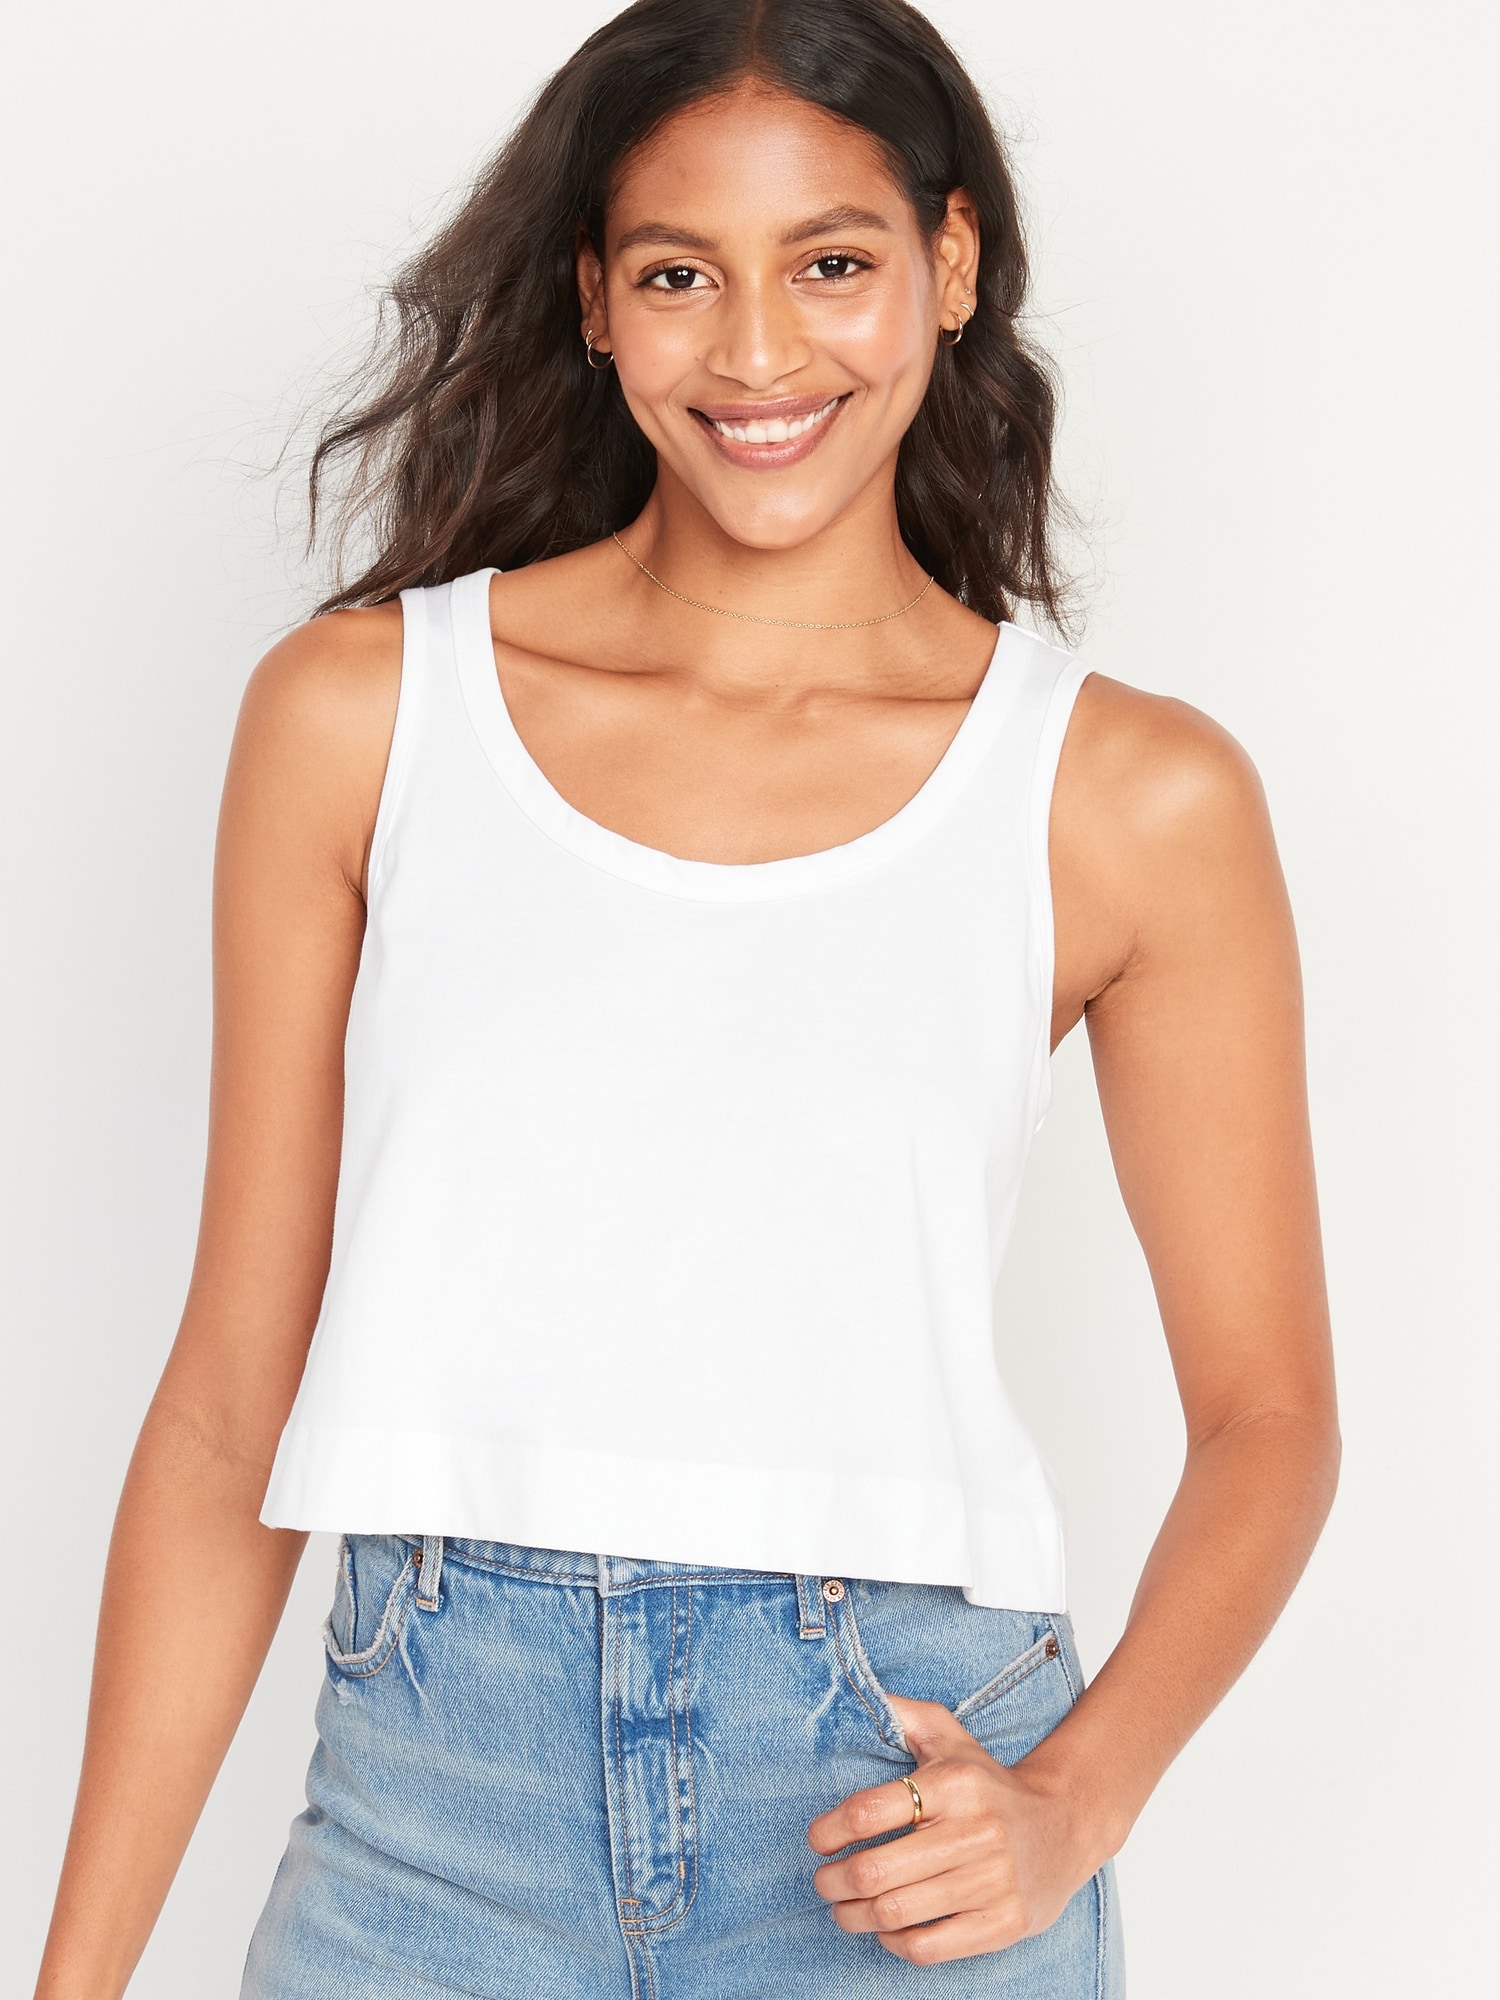 Cropped Tank Tops for Girls